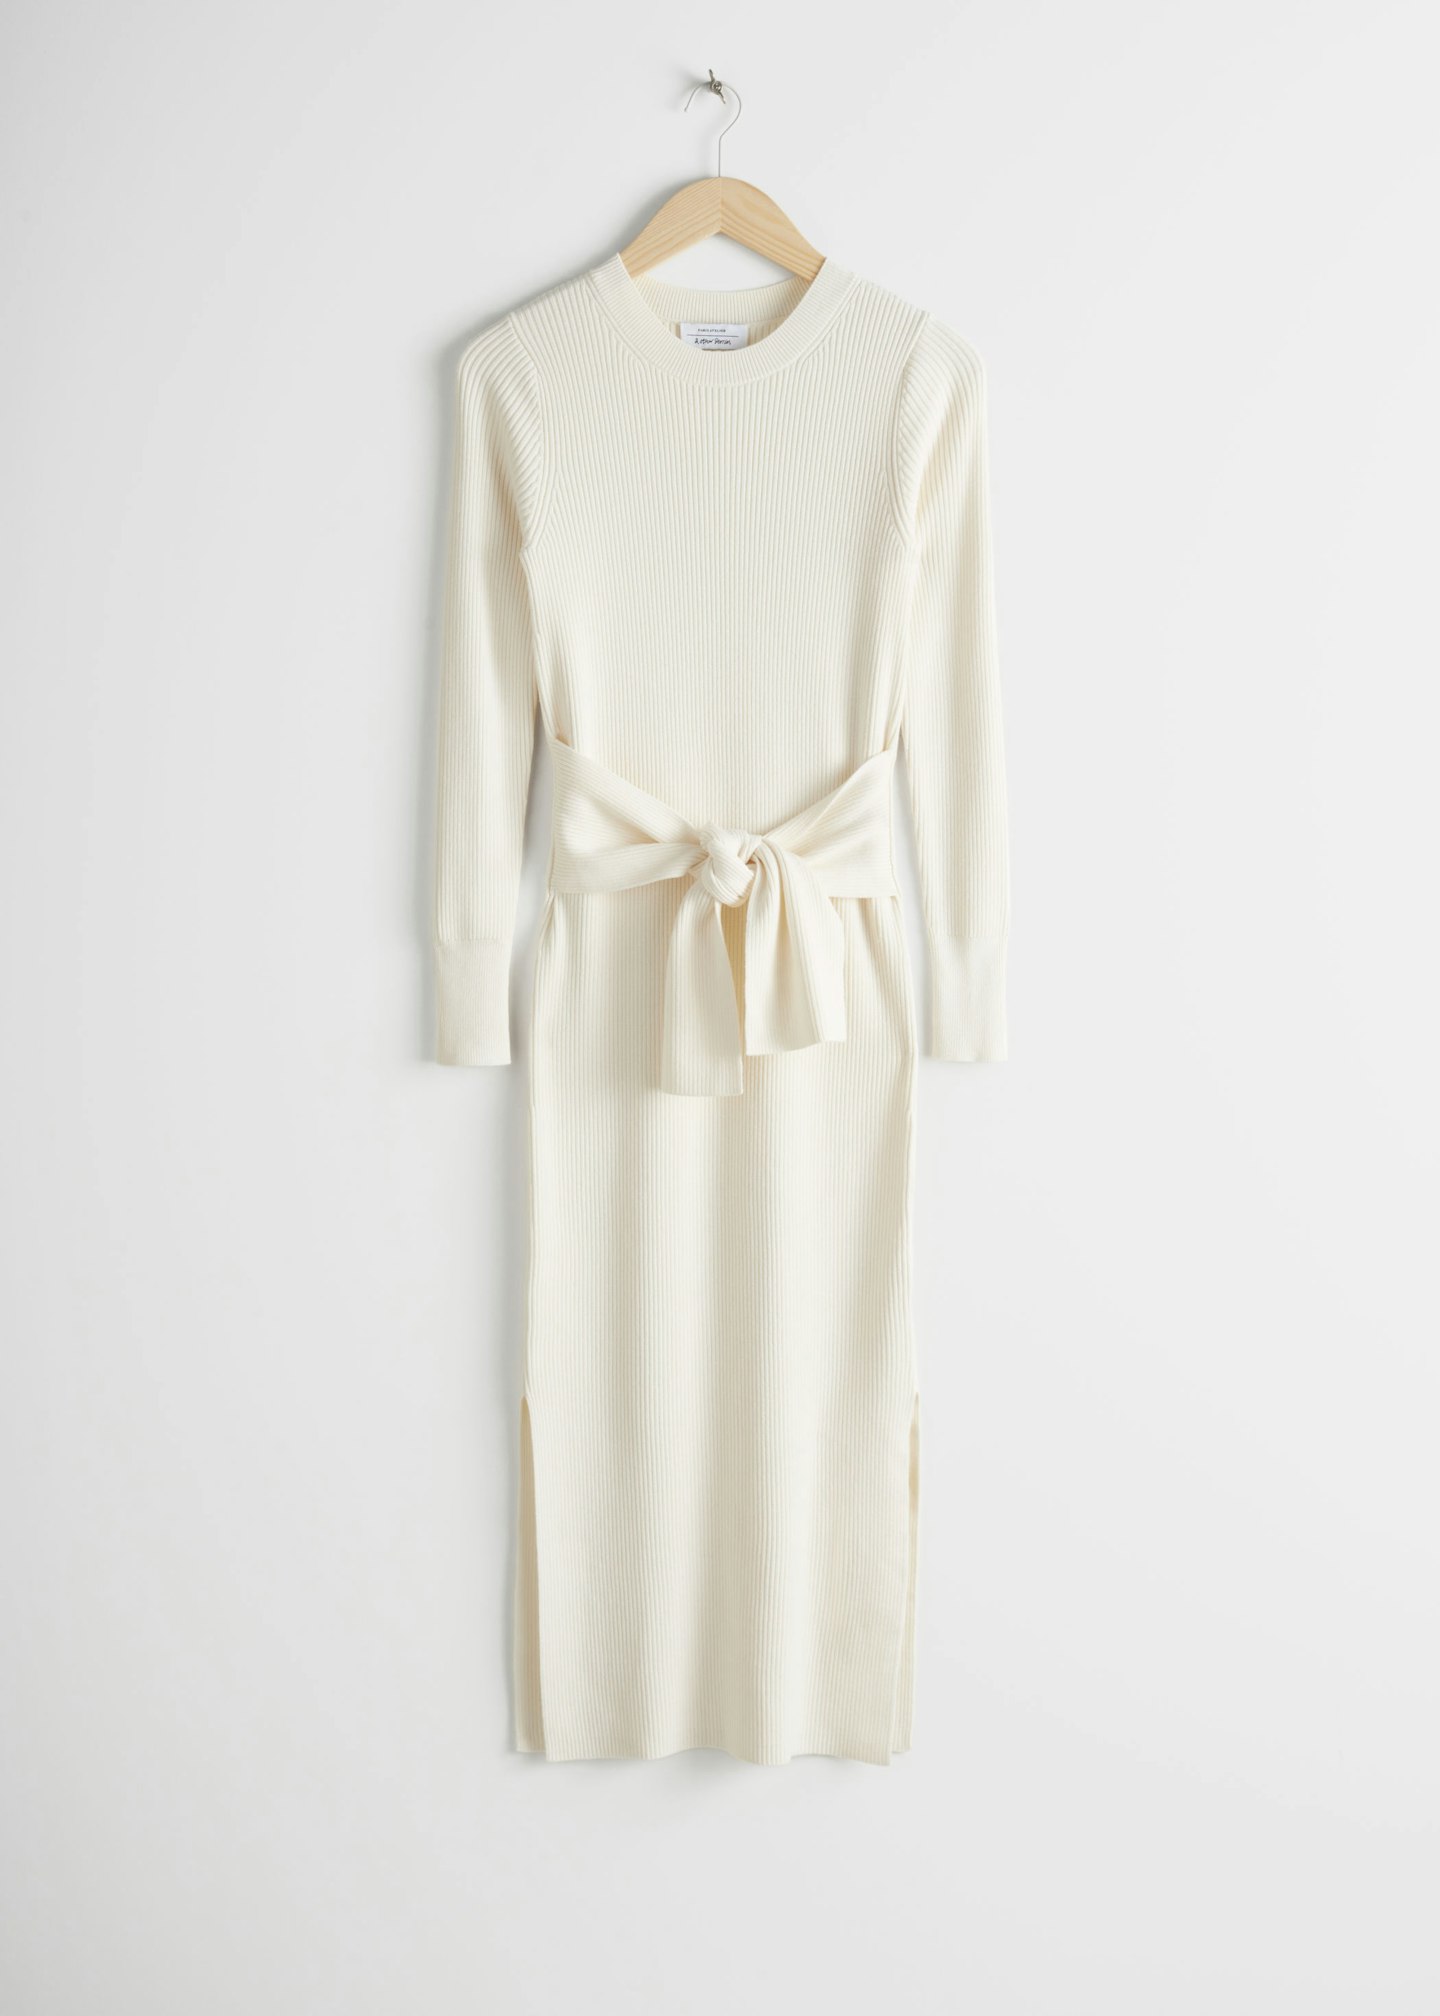 & Other Stories, Ribbed Knot Tie Belted Midi Dress, £95